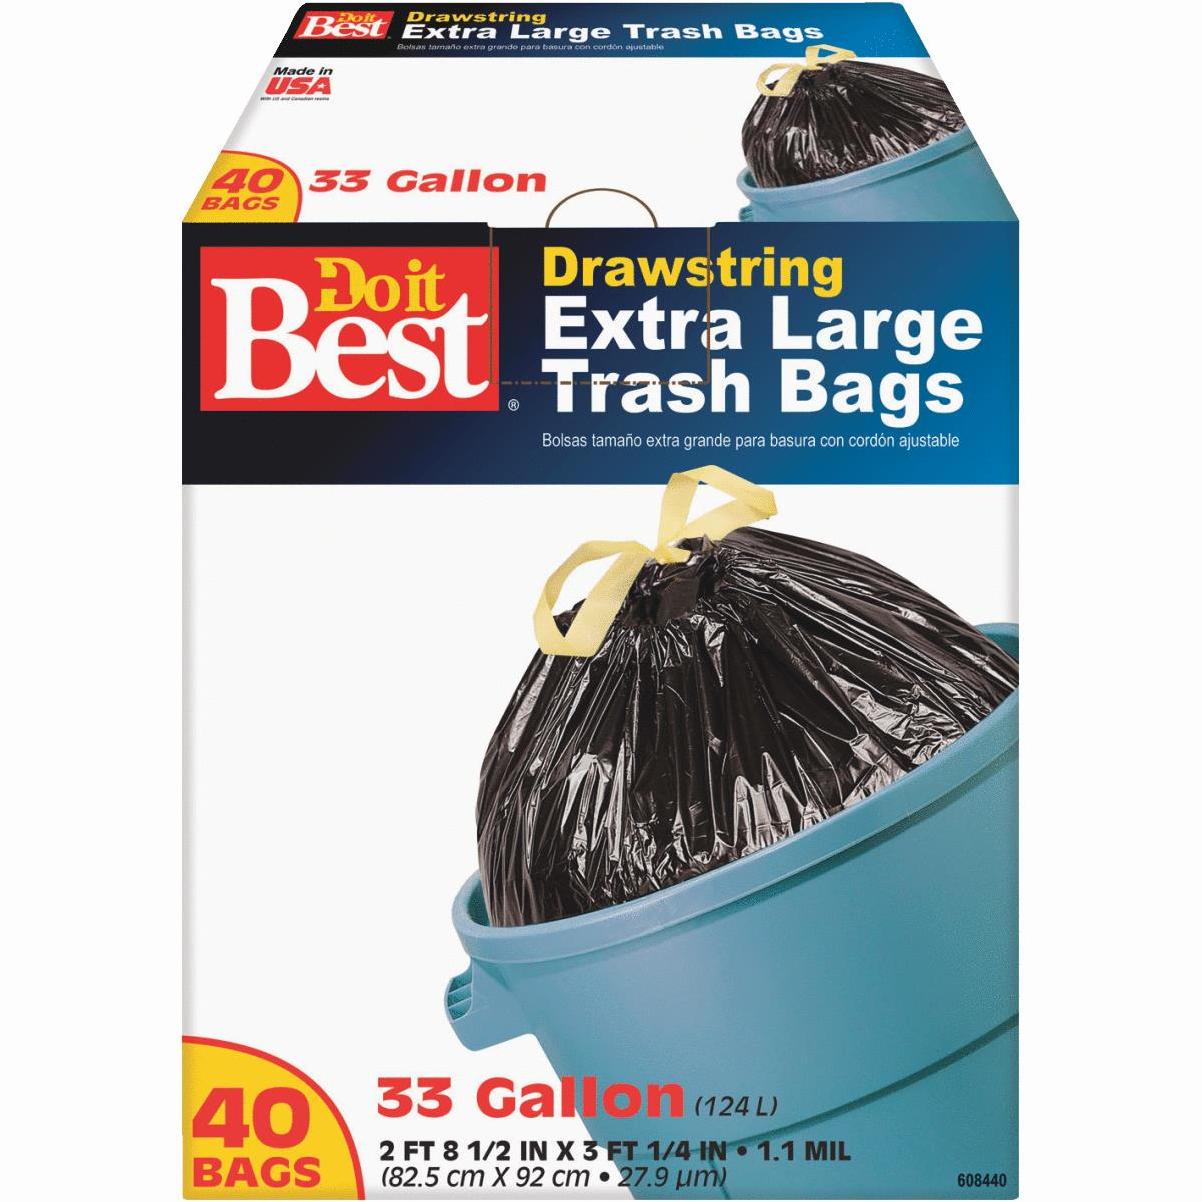 Do it Best 13 Gal. Tall Kitchen White Trash Bag (80-Count)